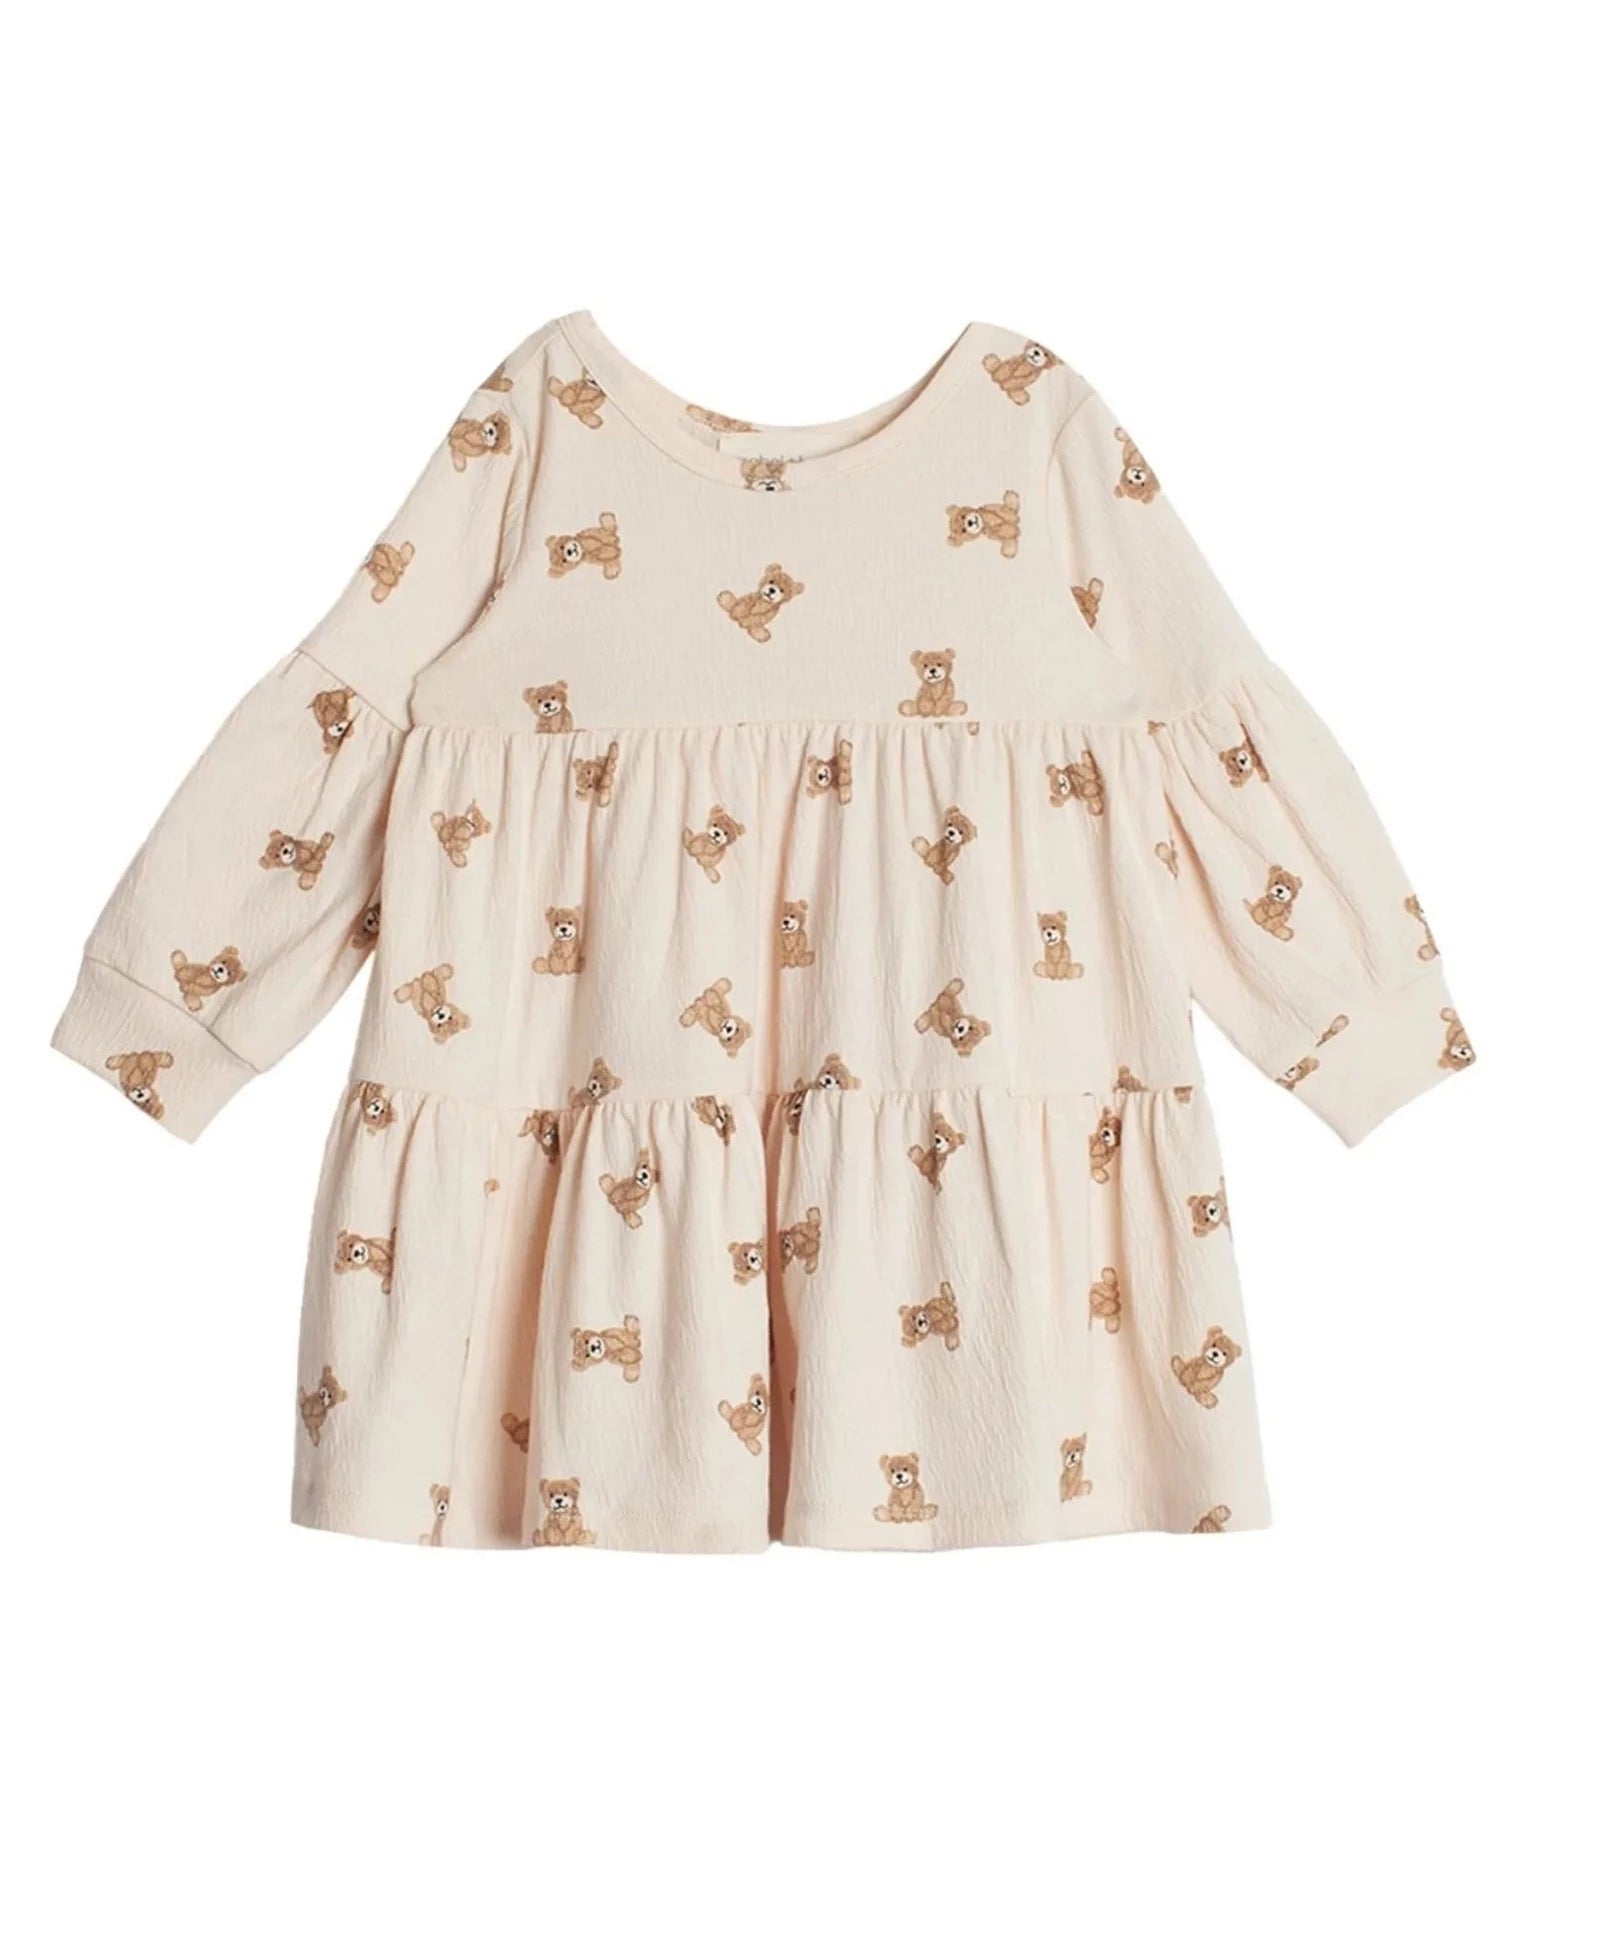 ivory long sleeve dress with bears all over